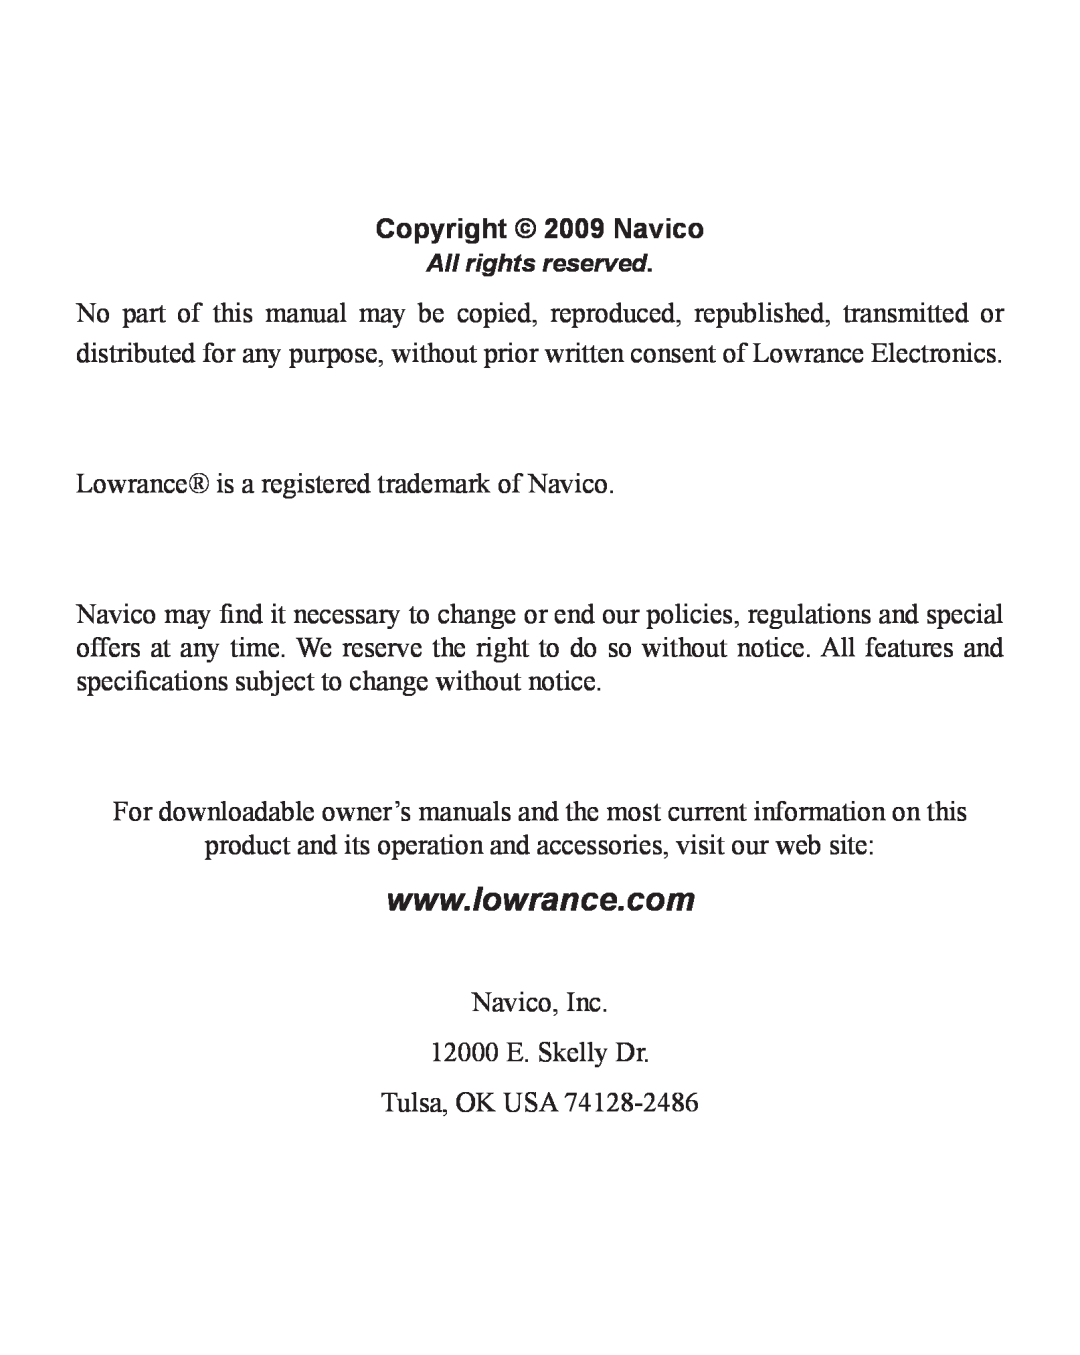 Lowrance electronic LWX-1 installation instructions Copyright 2009 Navico 